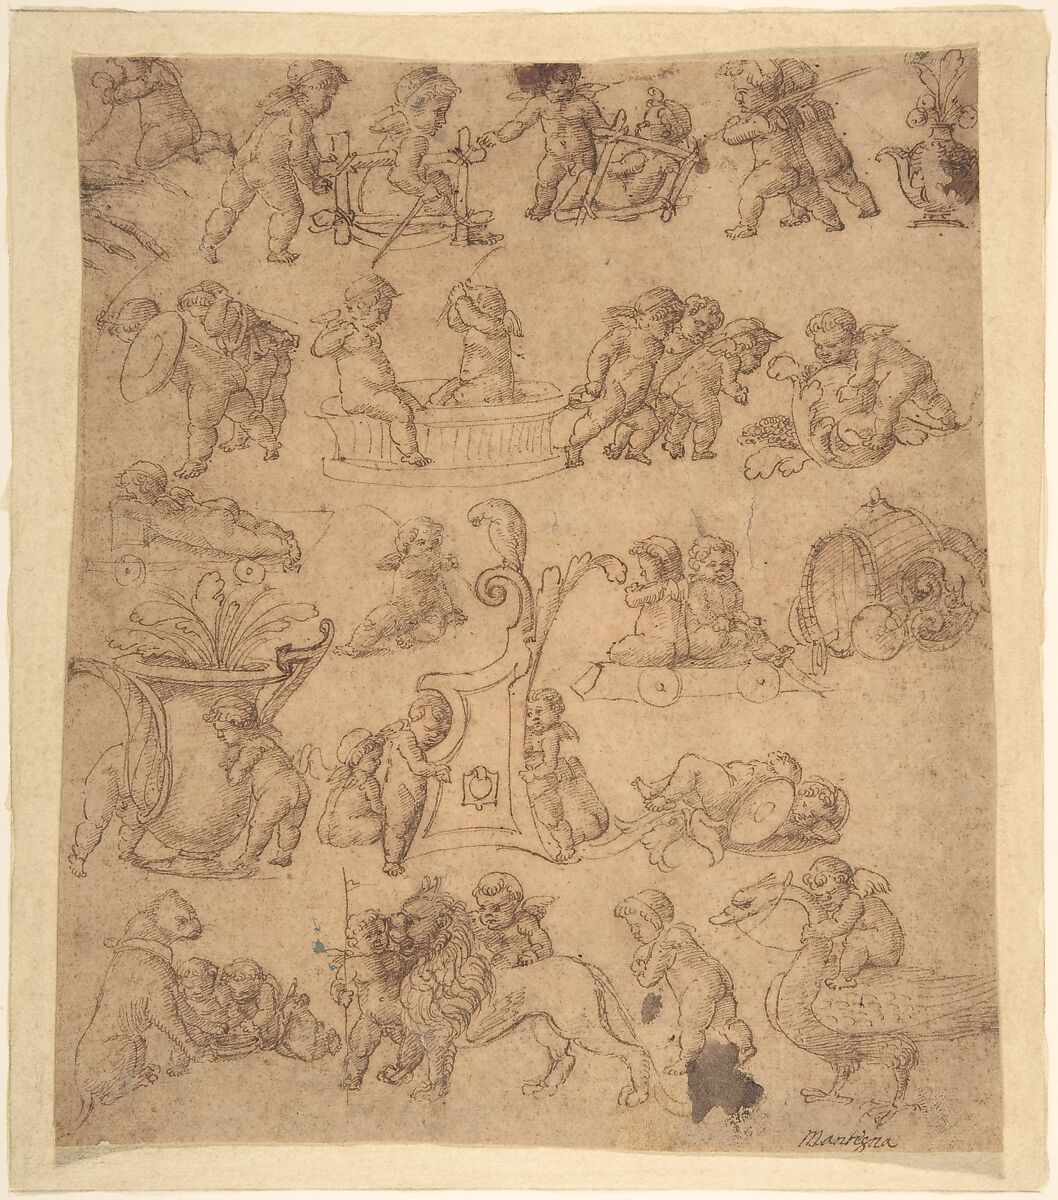 Studies of Putti, Anonymous, Italian, Paduan, second half of the 15th century, Pen and brown ink on cream paper washed light-brown 